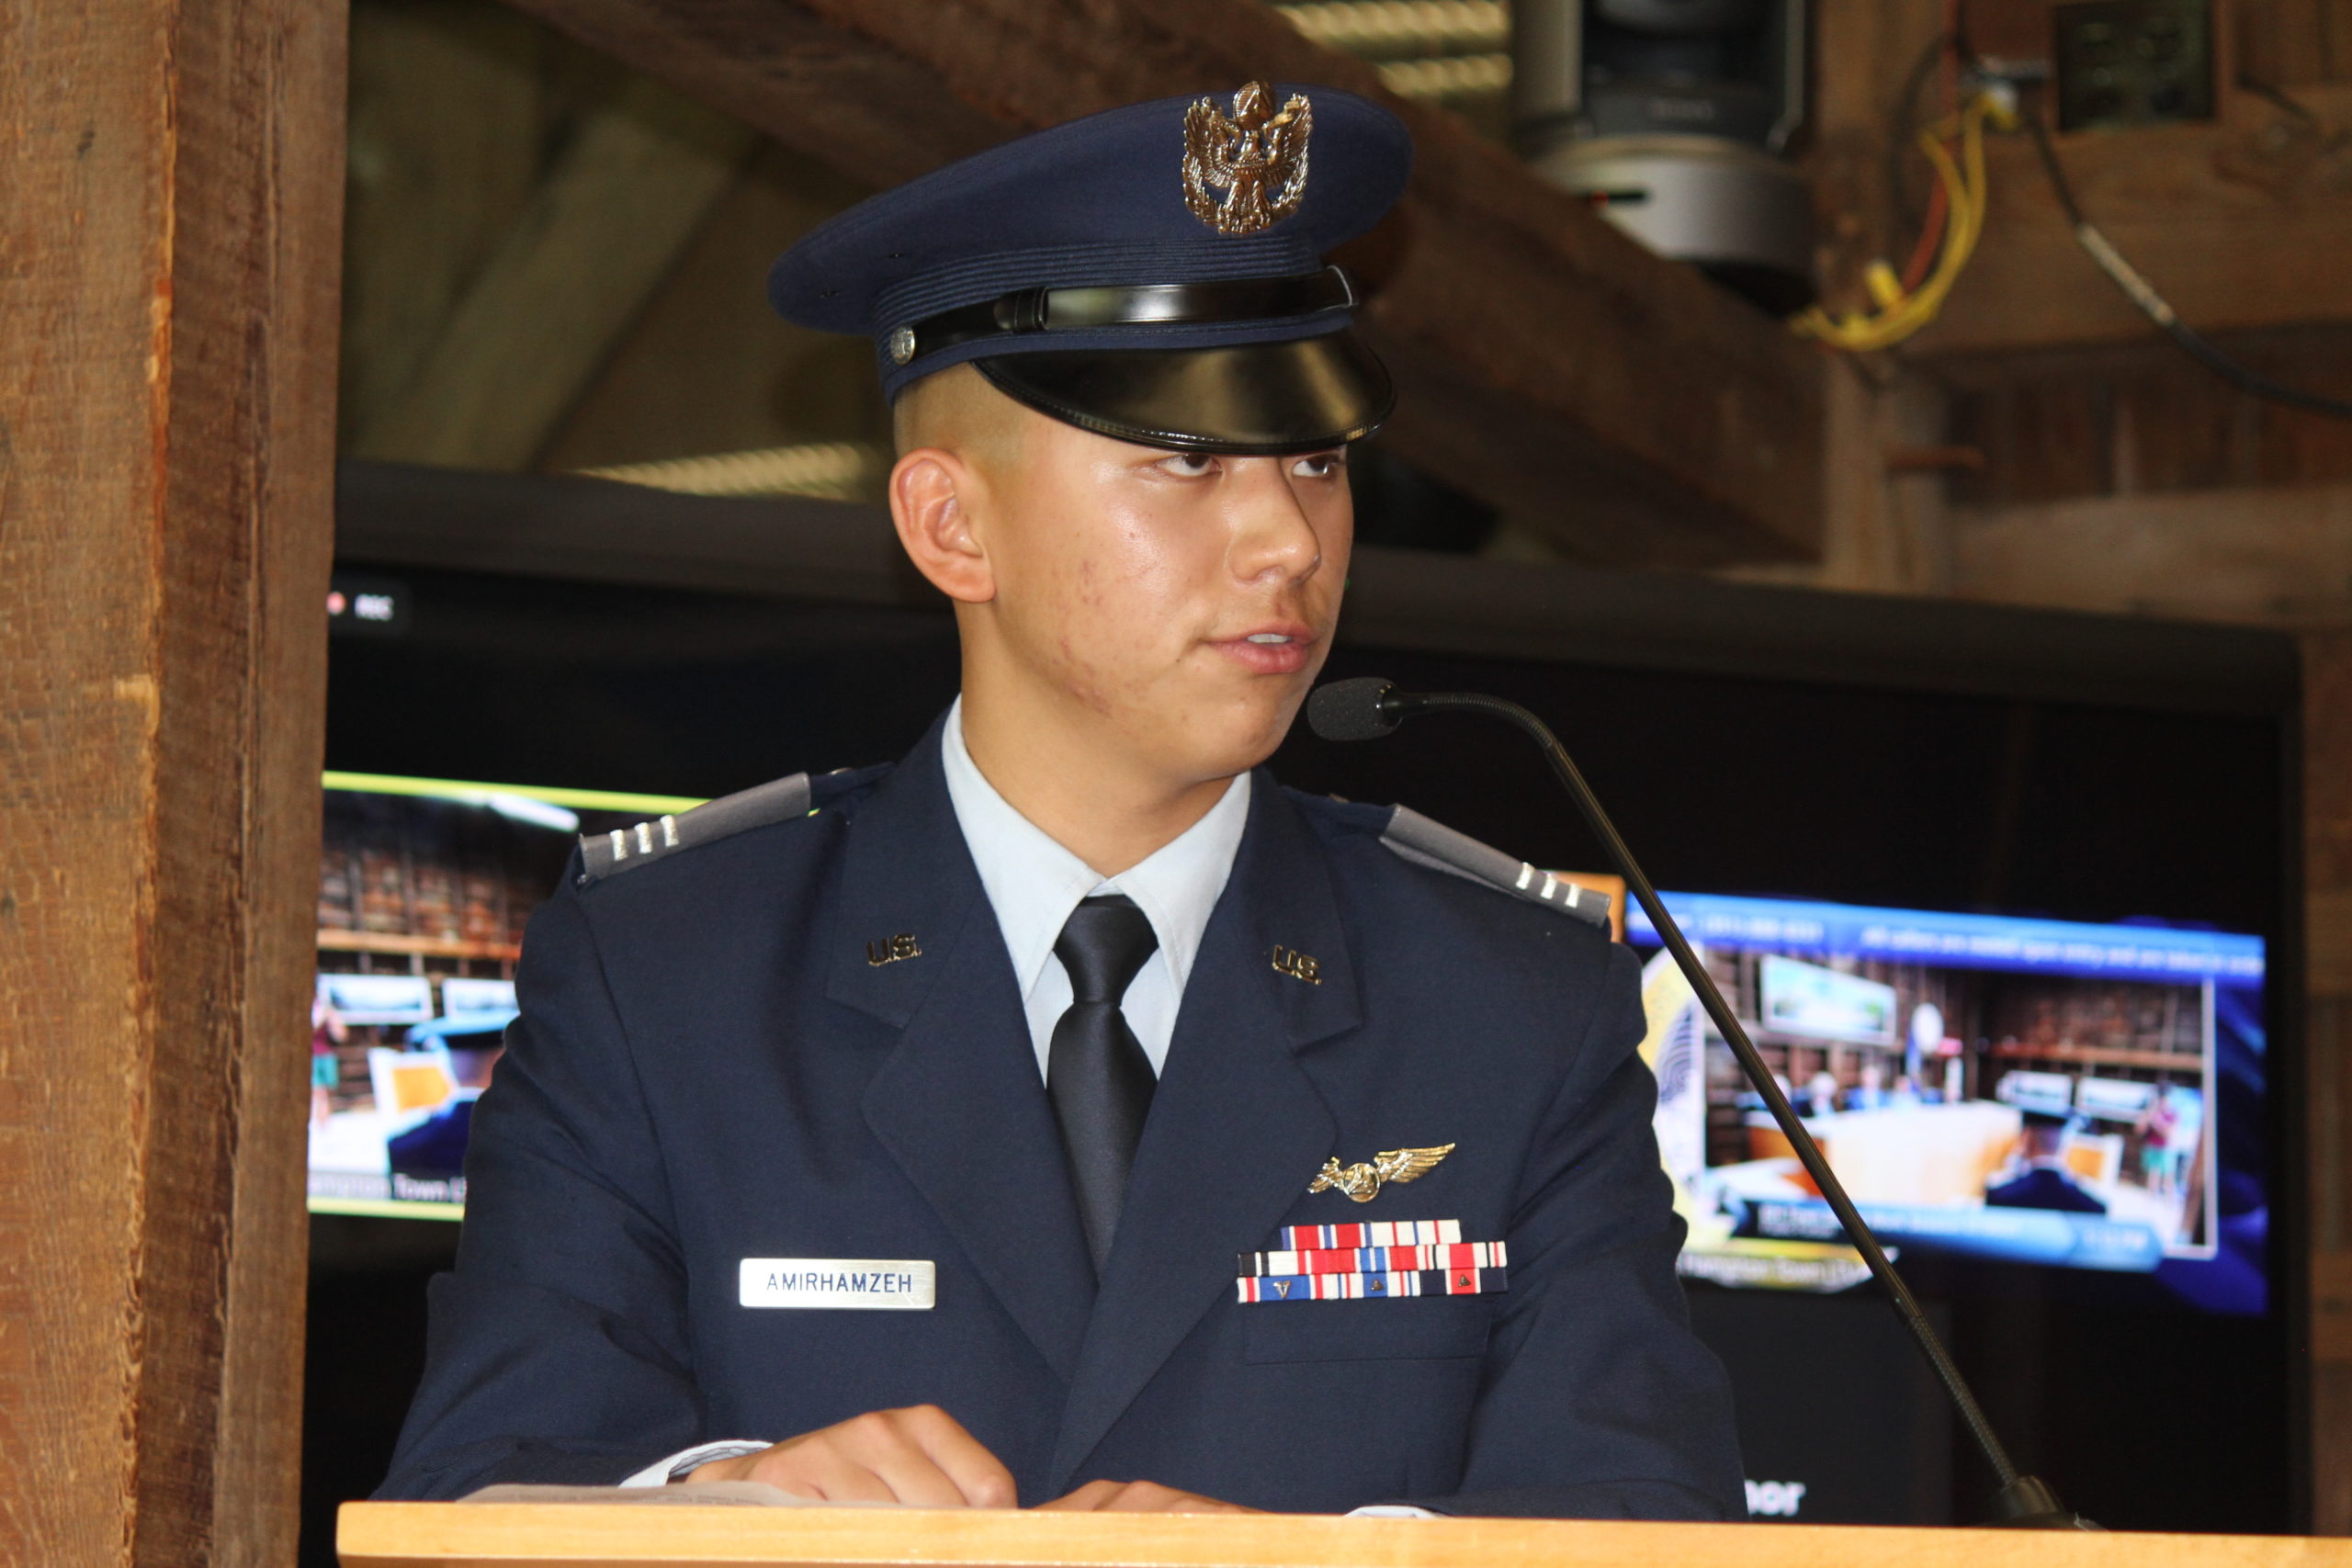 An U.S. Air Force officer representing the Civil Air Patrol, Air Force's civilian auxiliary, said that East Hampton Airport is a critical cog in its network of landing strips in the Northeast that are used for search and rescue and natural disaster responses.